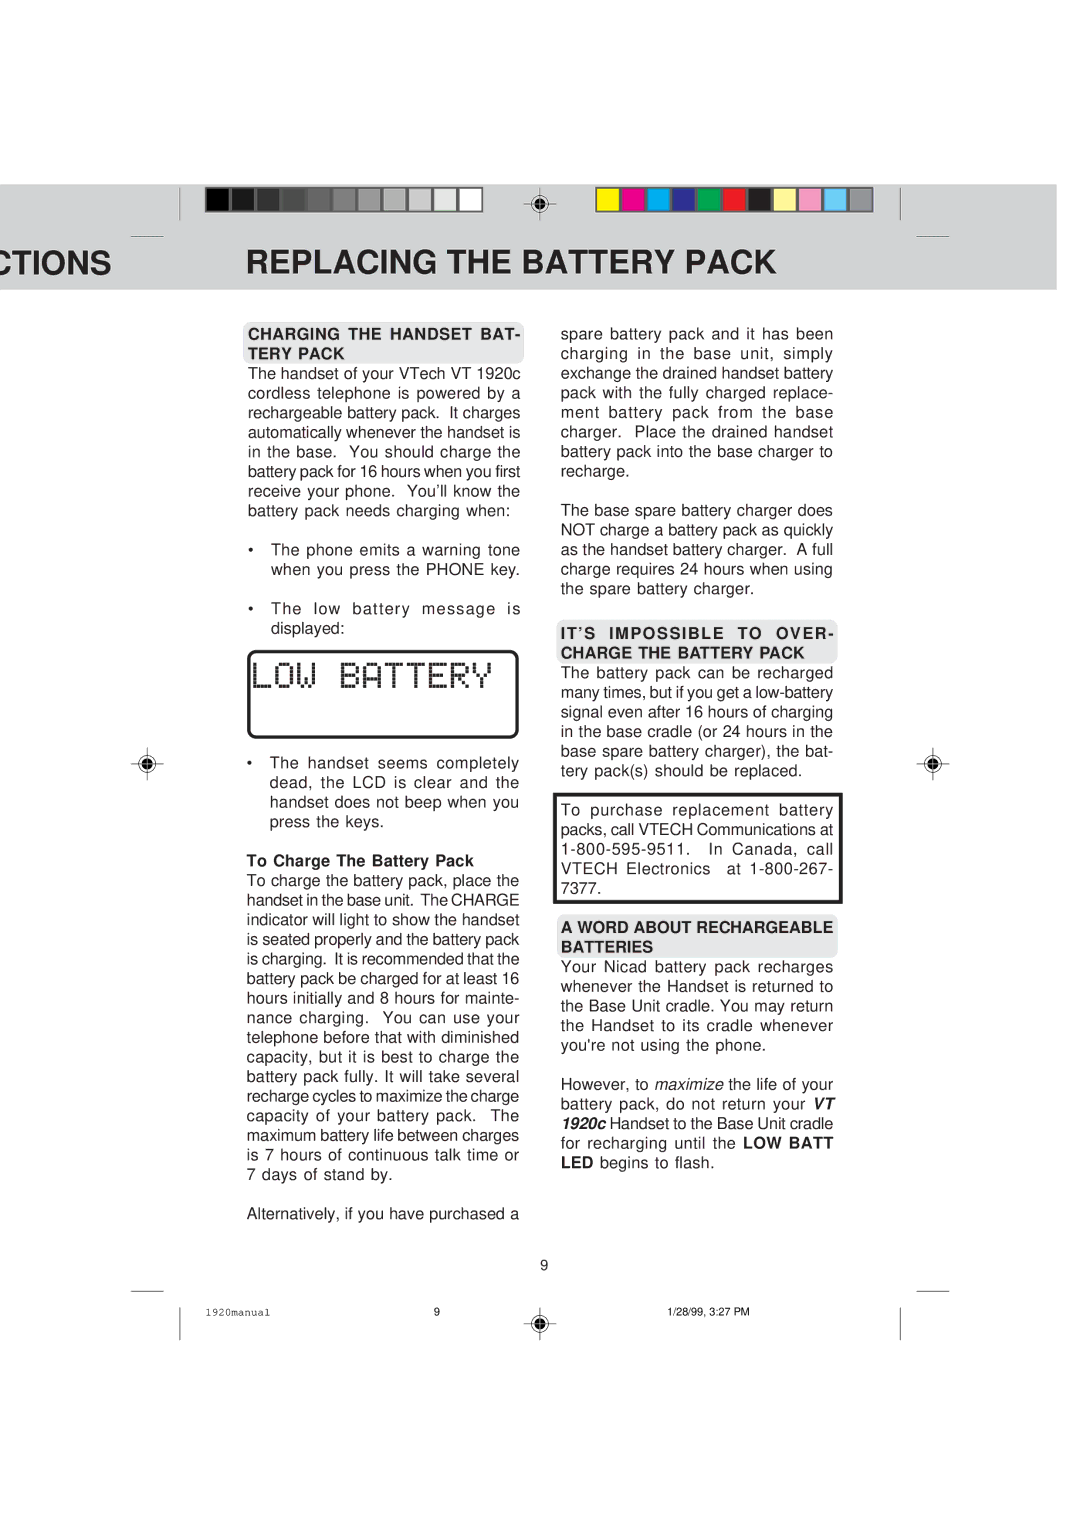 VTech VT 1920C manual Ctions Replacing the Battery Pack, Charging the Handset BAT- Tery Pack, To Charge The Battery Pack 